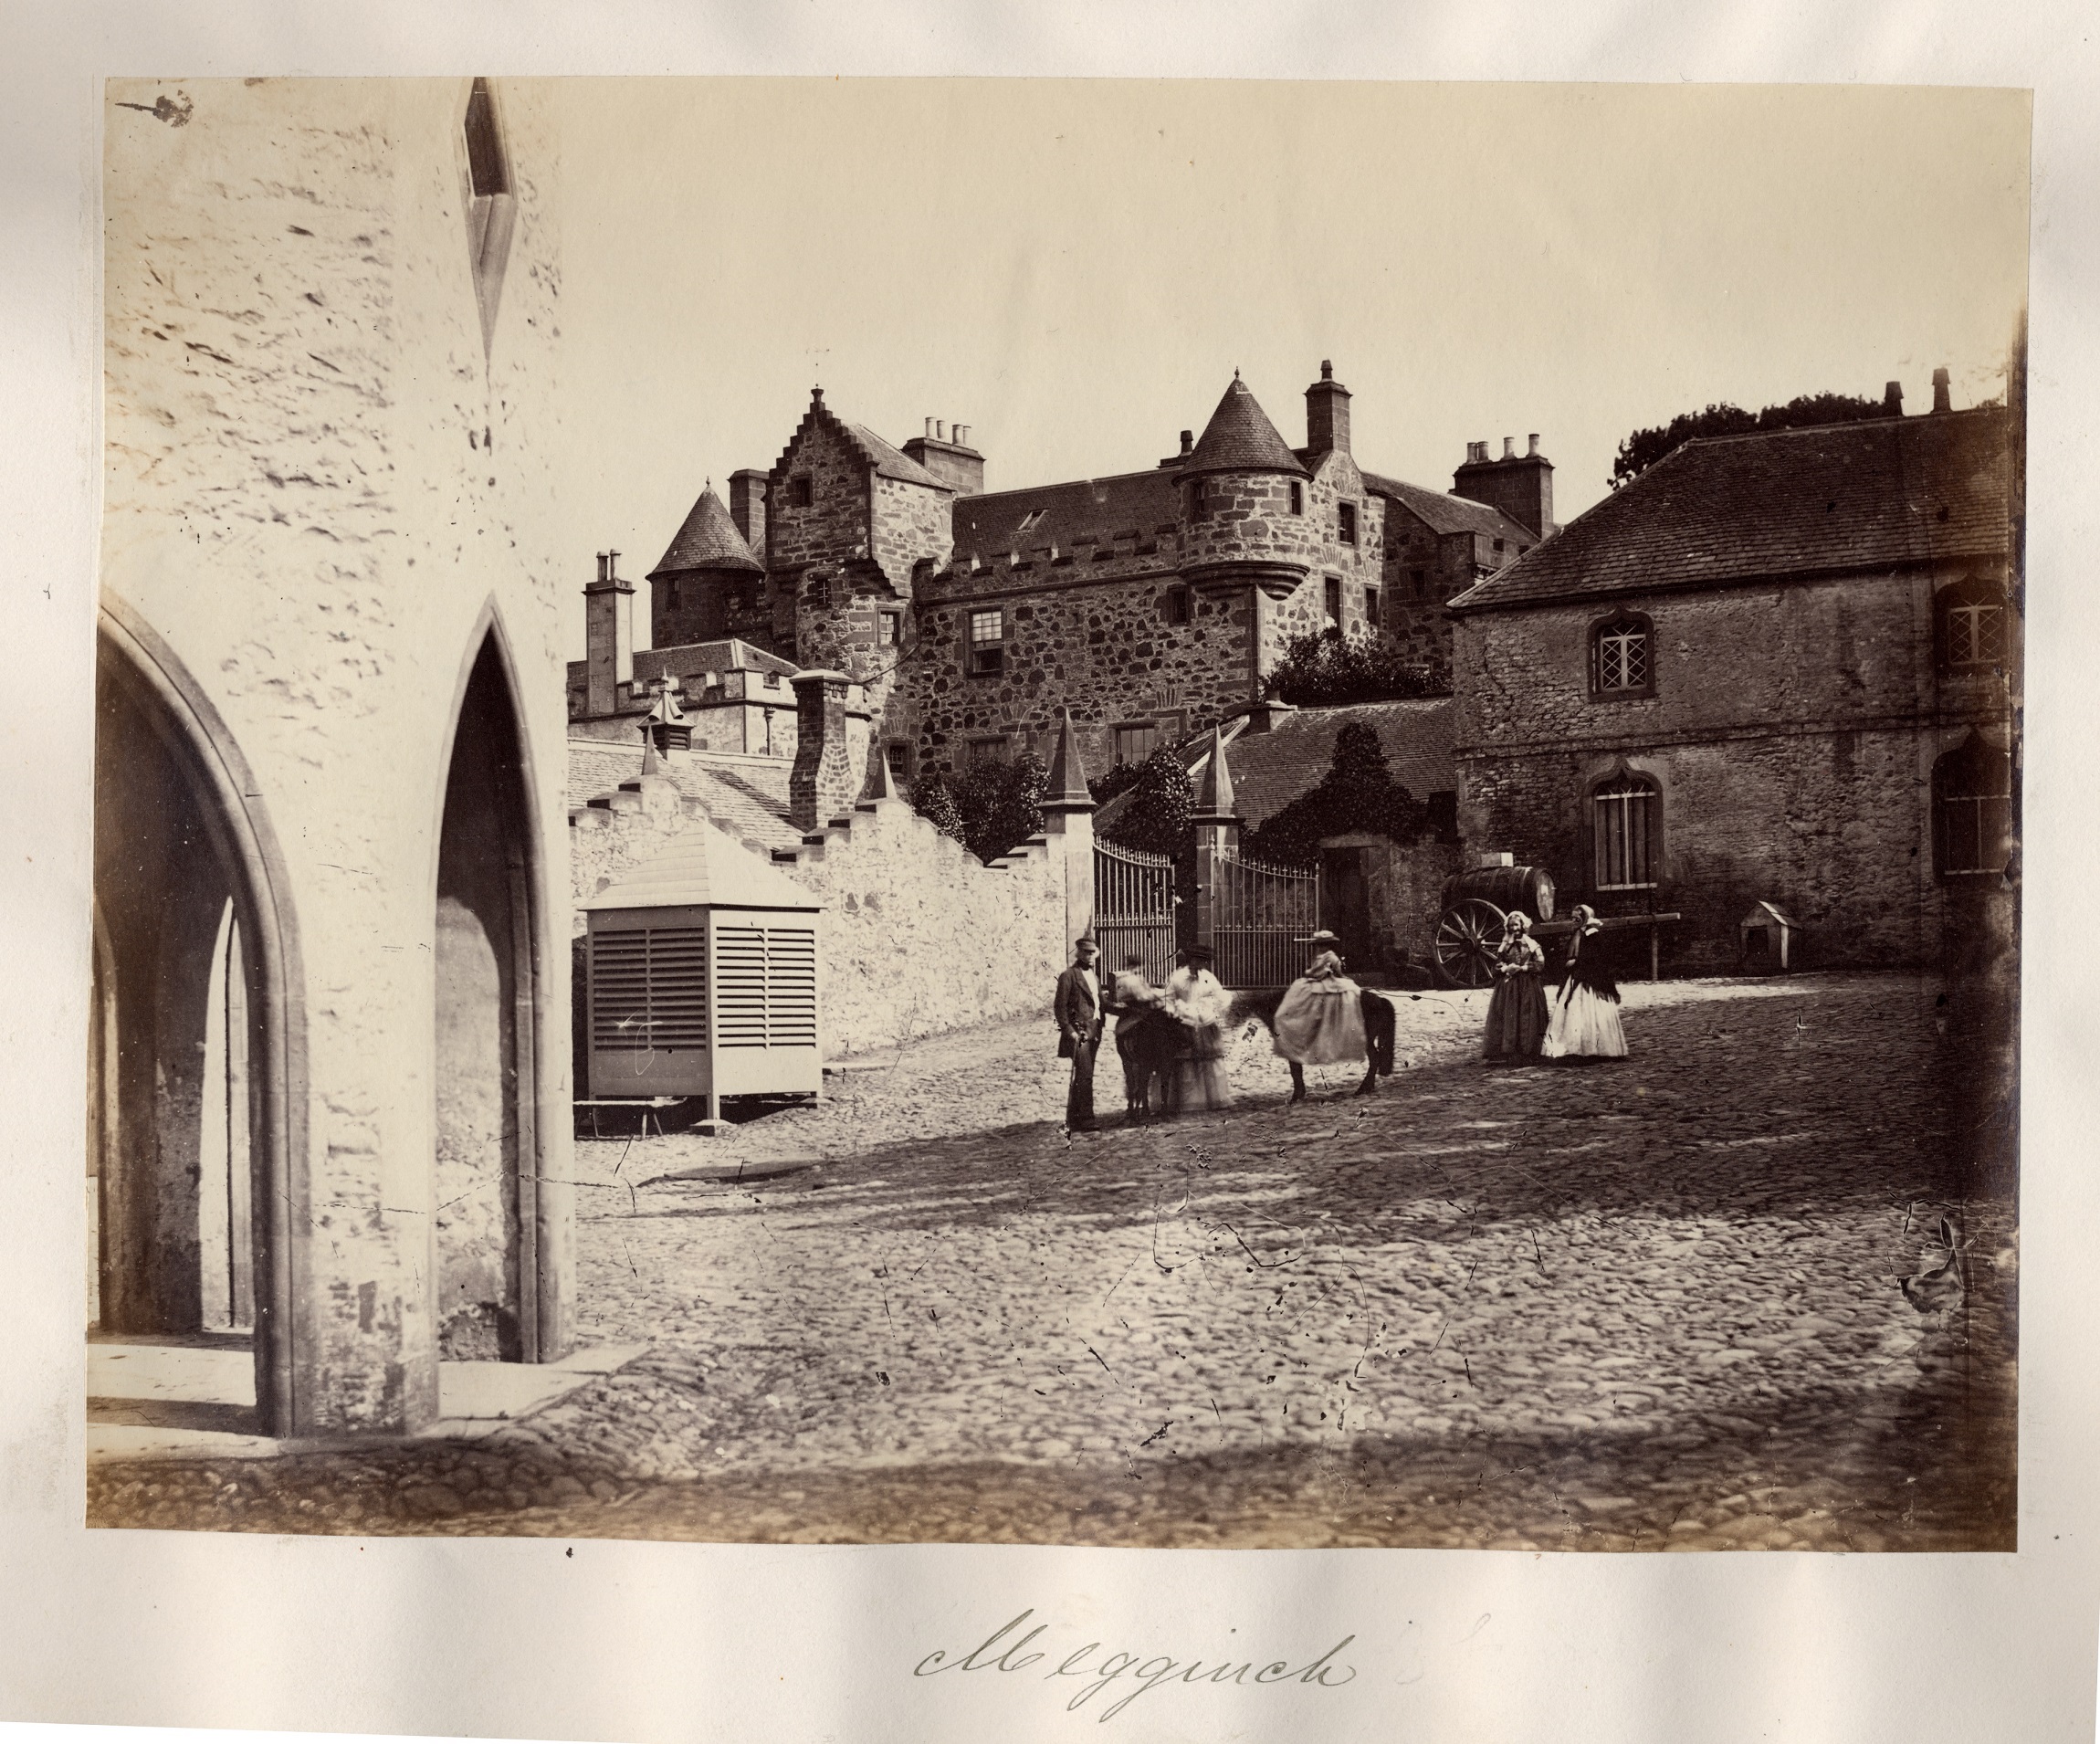 A black and white archive photo of the castle courtyard. There are people standing in the courtyard.